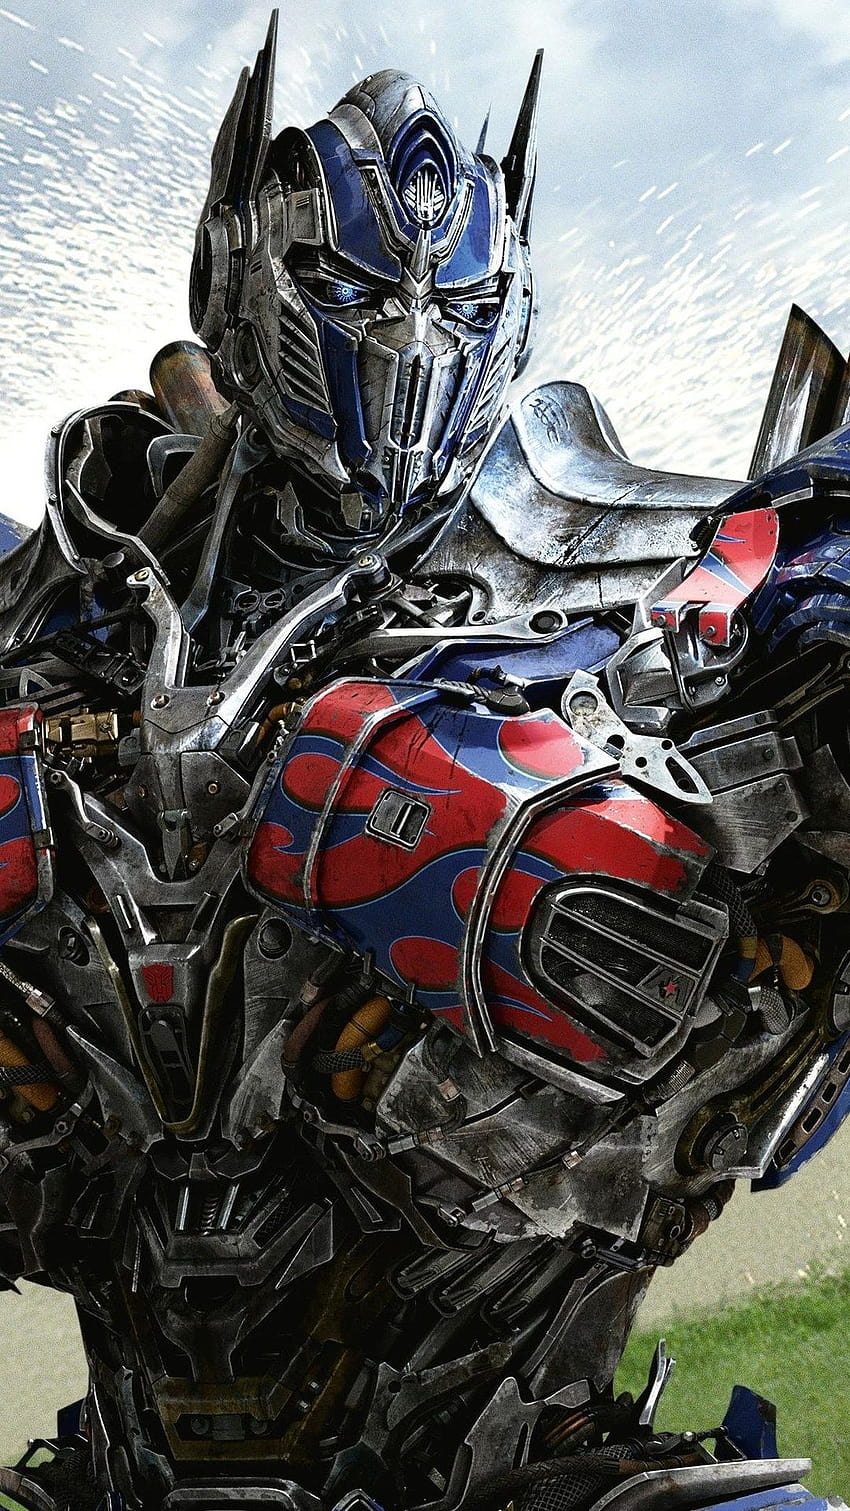 6112831 / 1080x1920 transformers, movies, optimus prime for Iphone 6, 7, 8, transformers movie iphone HD phone wallpaper